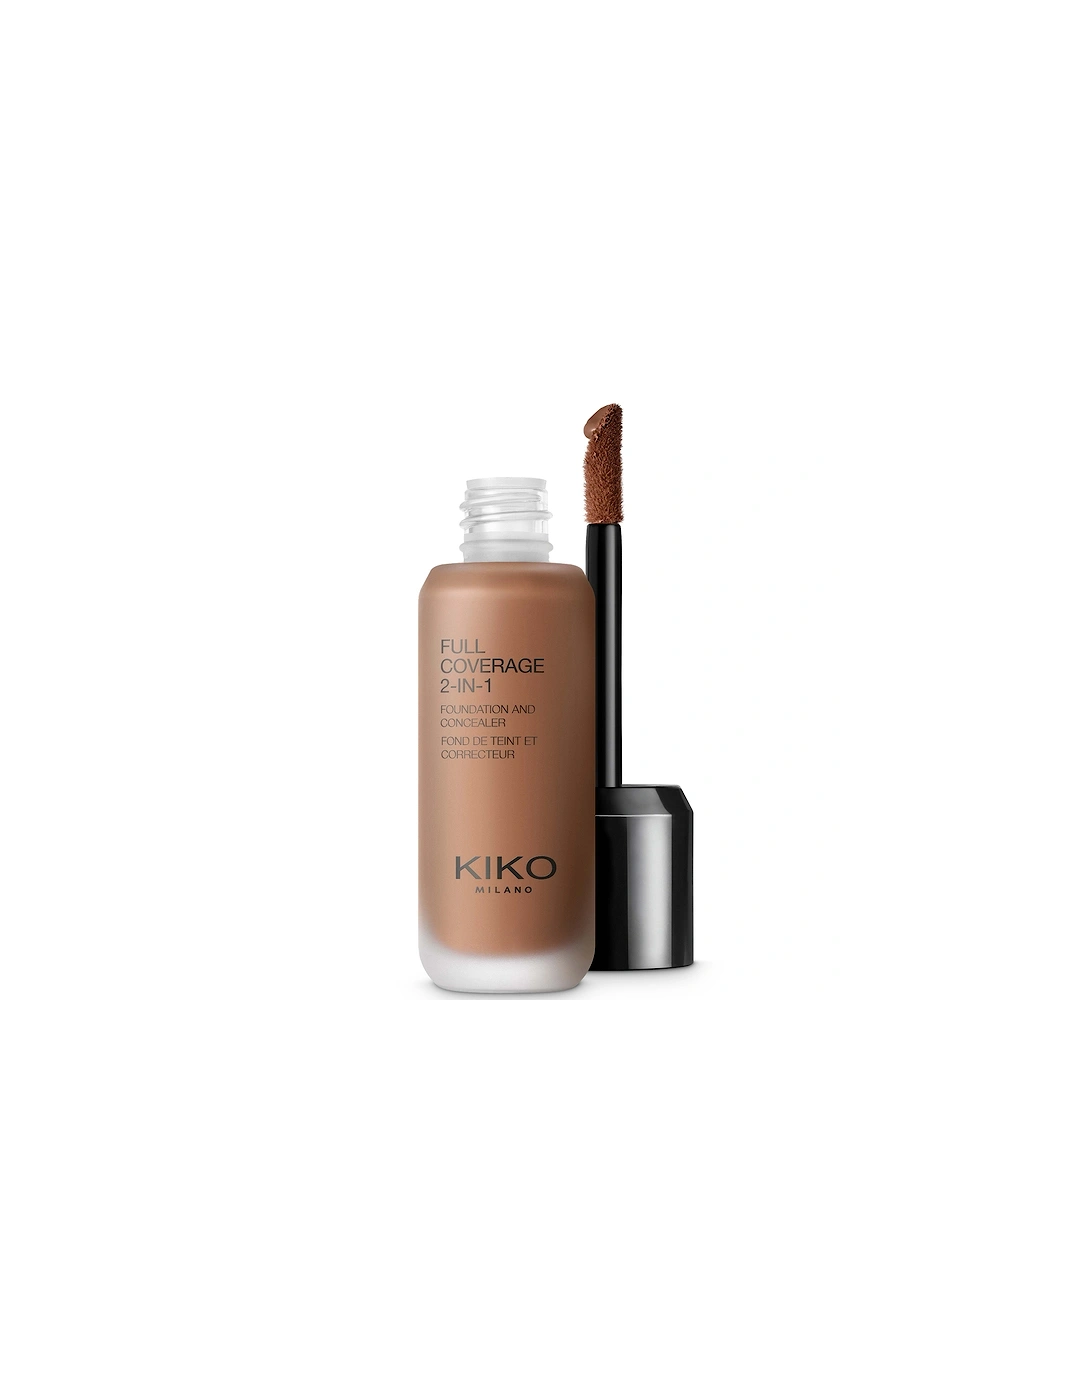 Full Coverage 2-in-1 Foundation and Concealer 25ml - 170 Neutral, 2 of 1